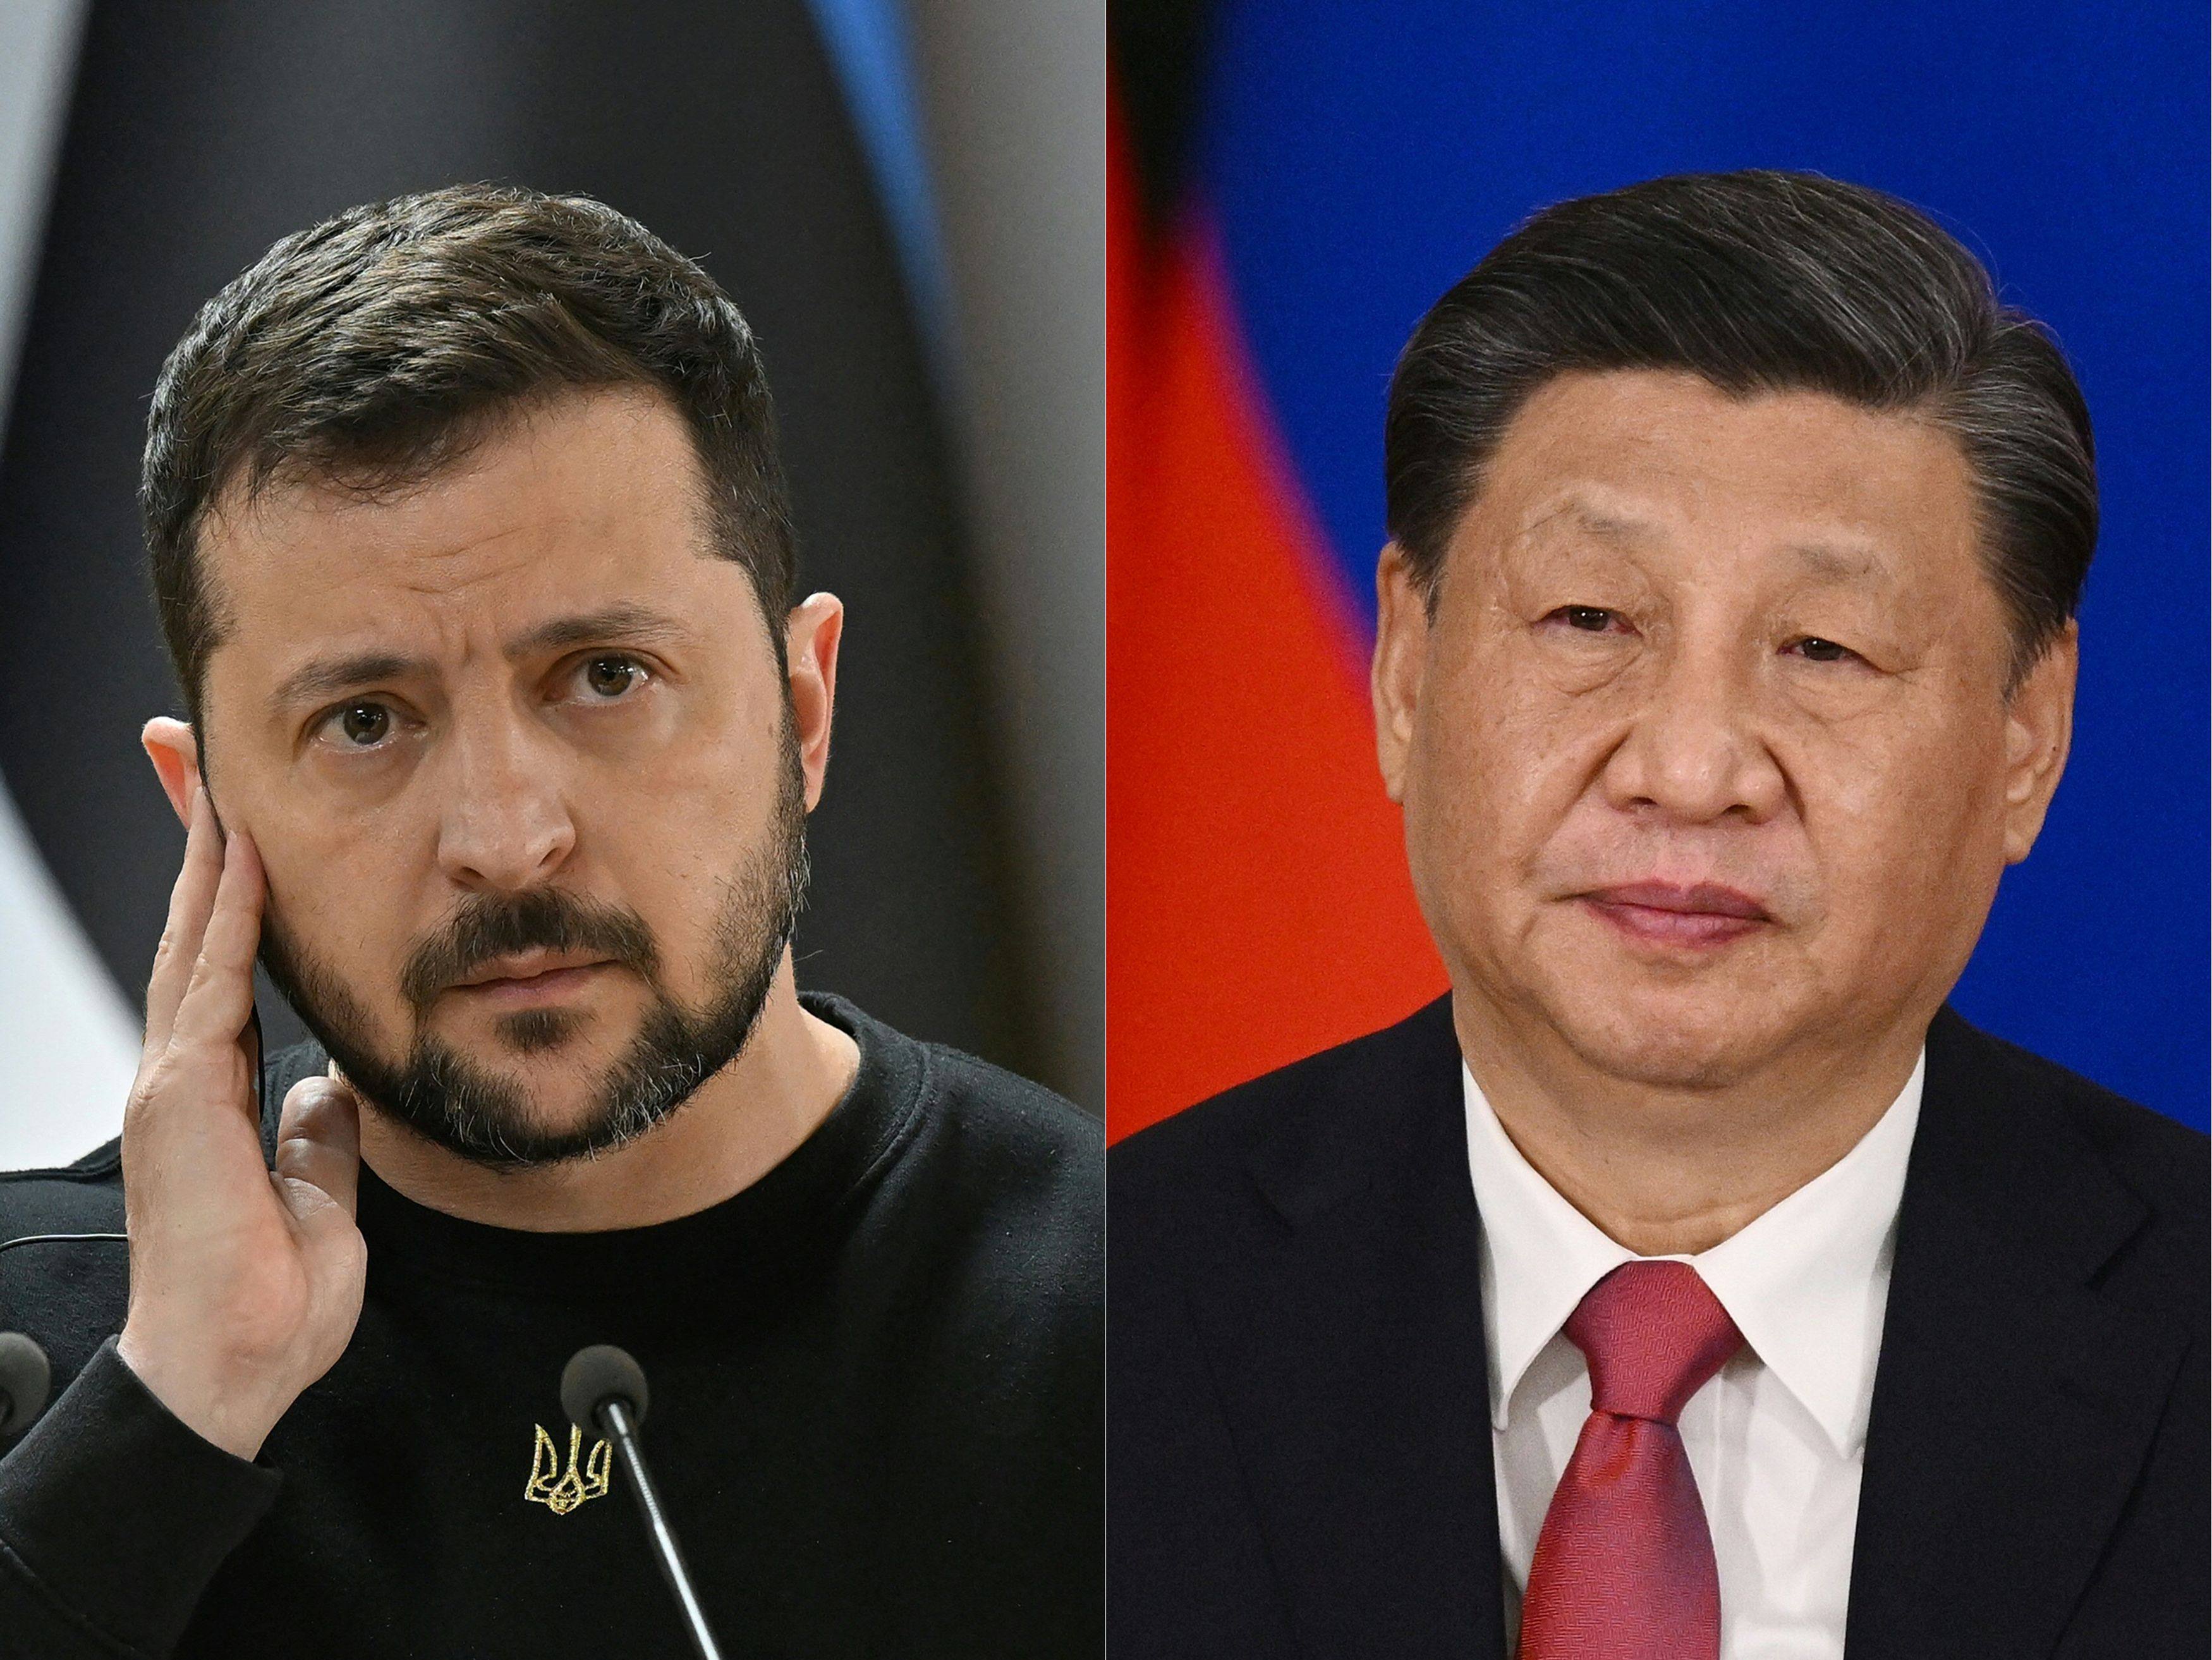 China’s standing as a potential mediator rose after Chinese President Xi Jinping (right) spoke with Ukrainian President Volodymyr Zelensky, analysts said. Photos: AFP